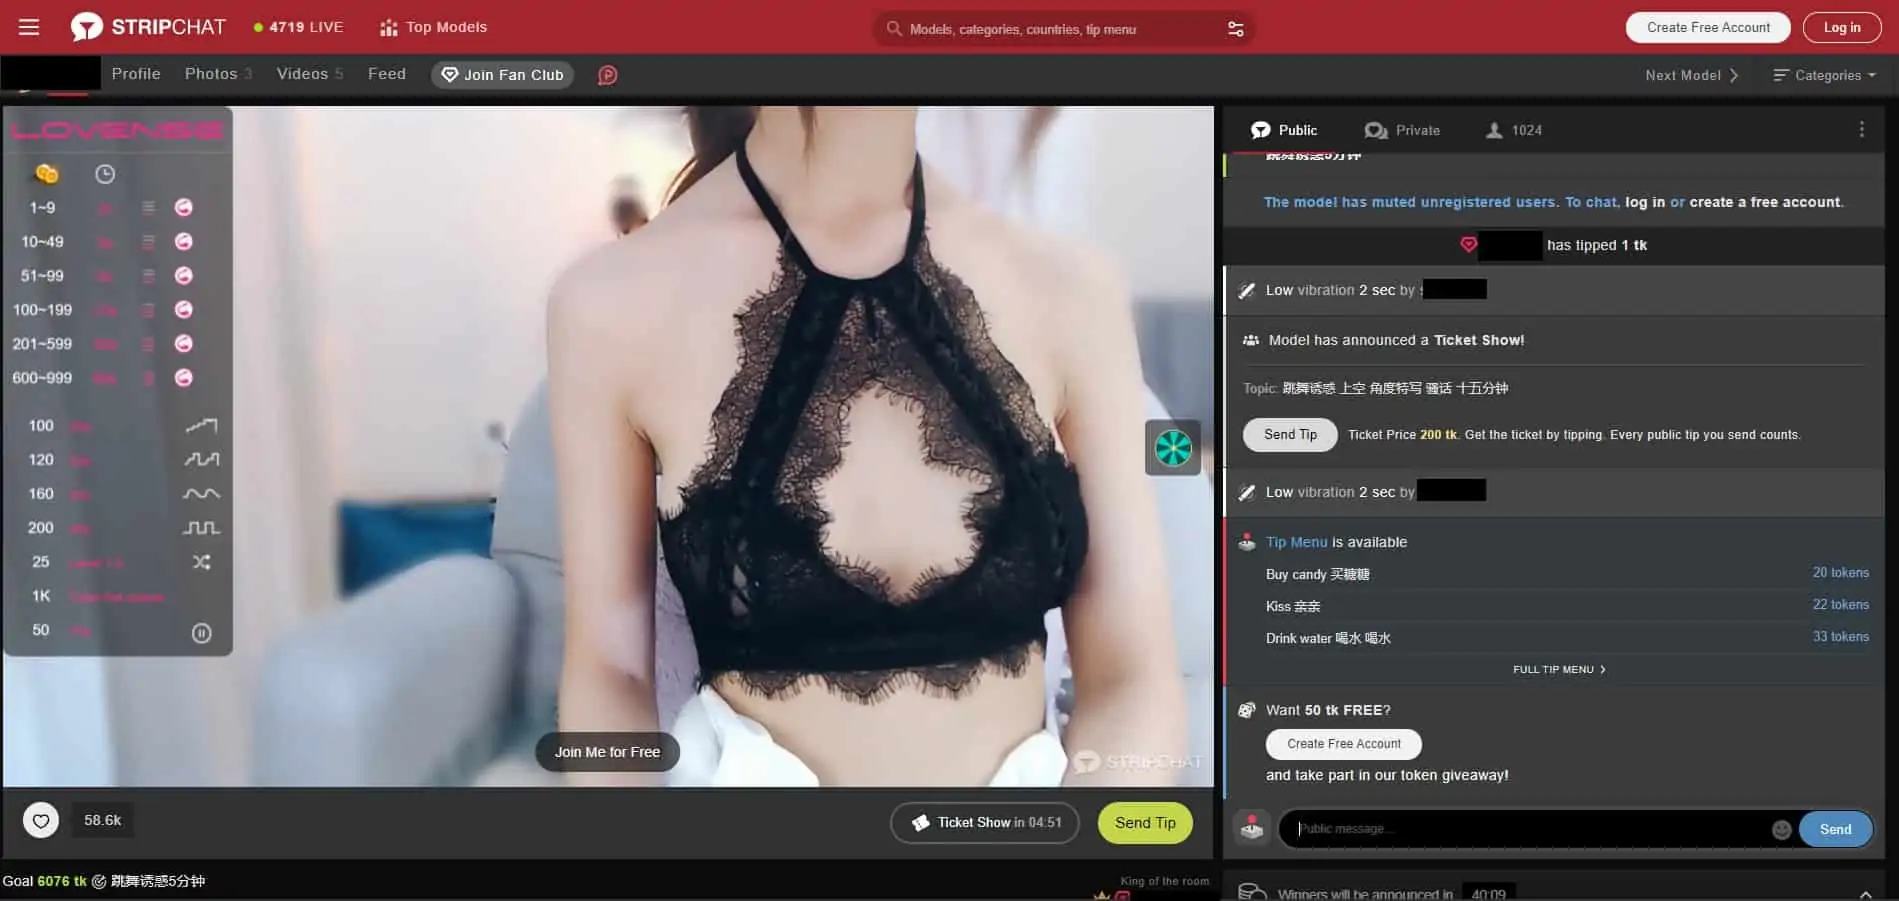 Sex cam site Stripchat exposes user, model info on the web report image